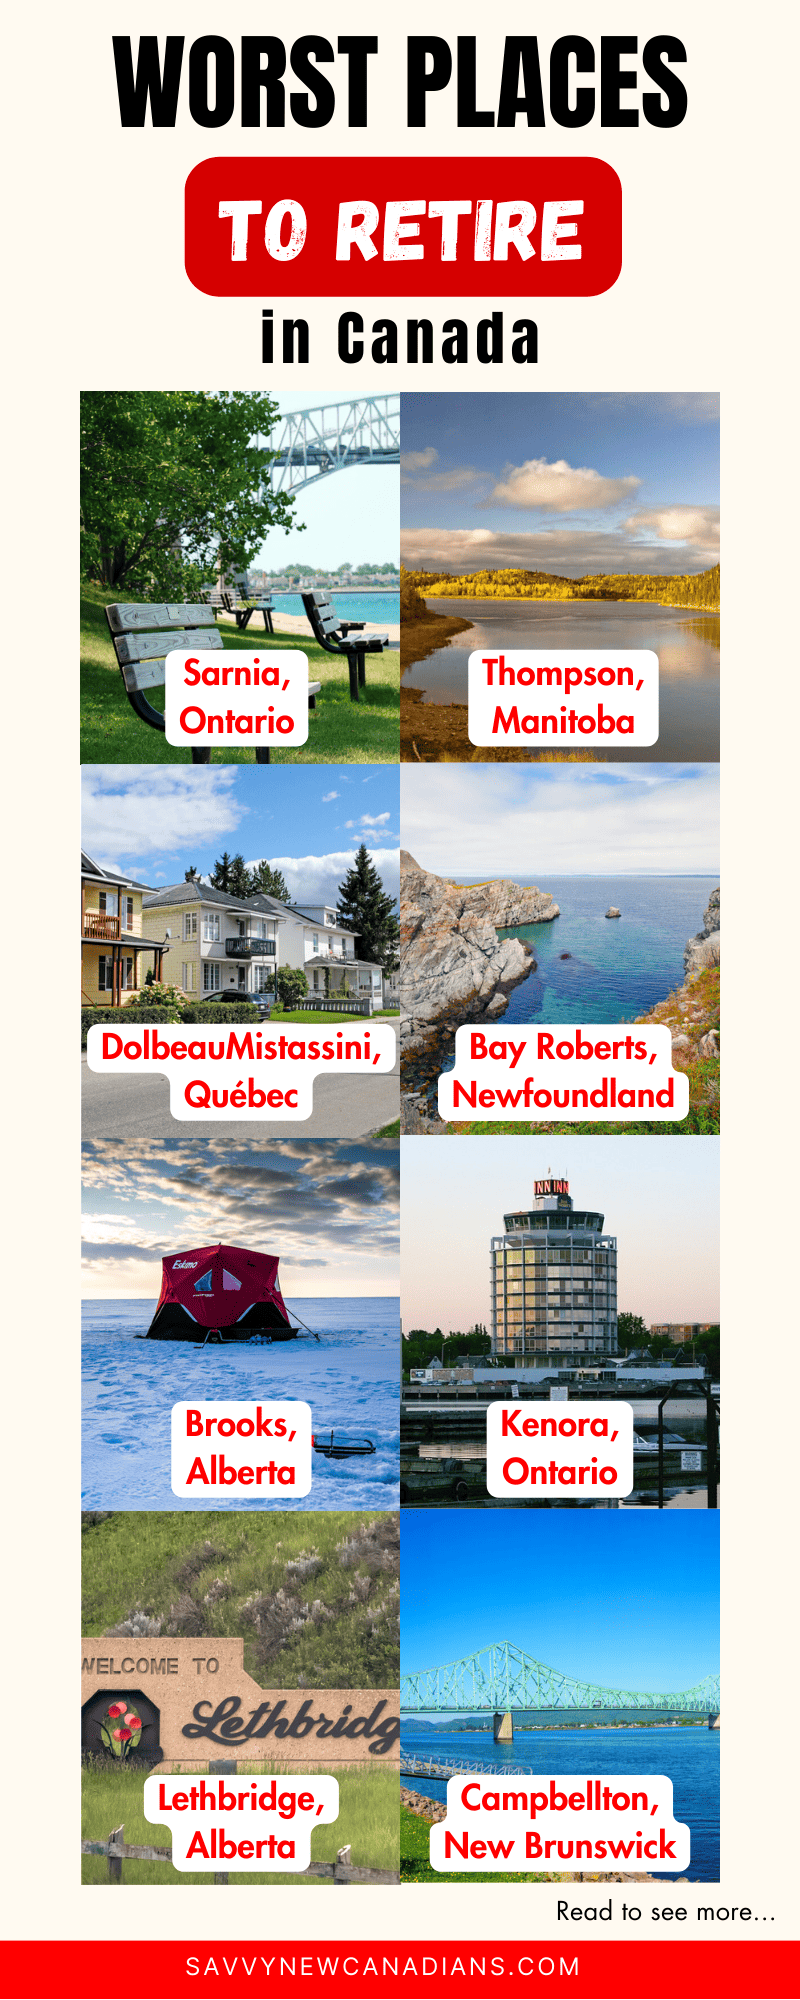 image showing photos of worst places to retire in canada